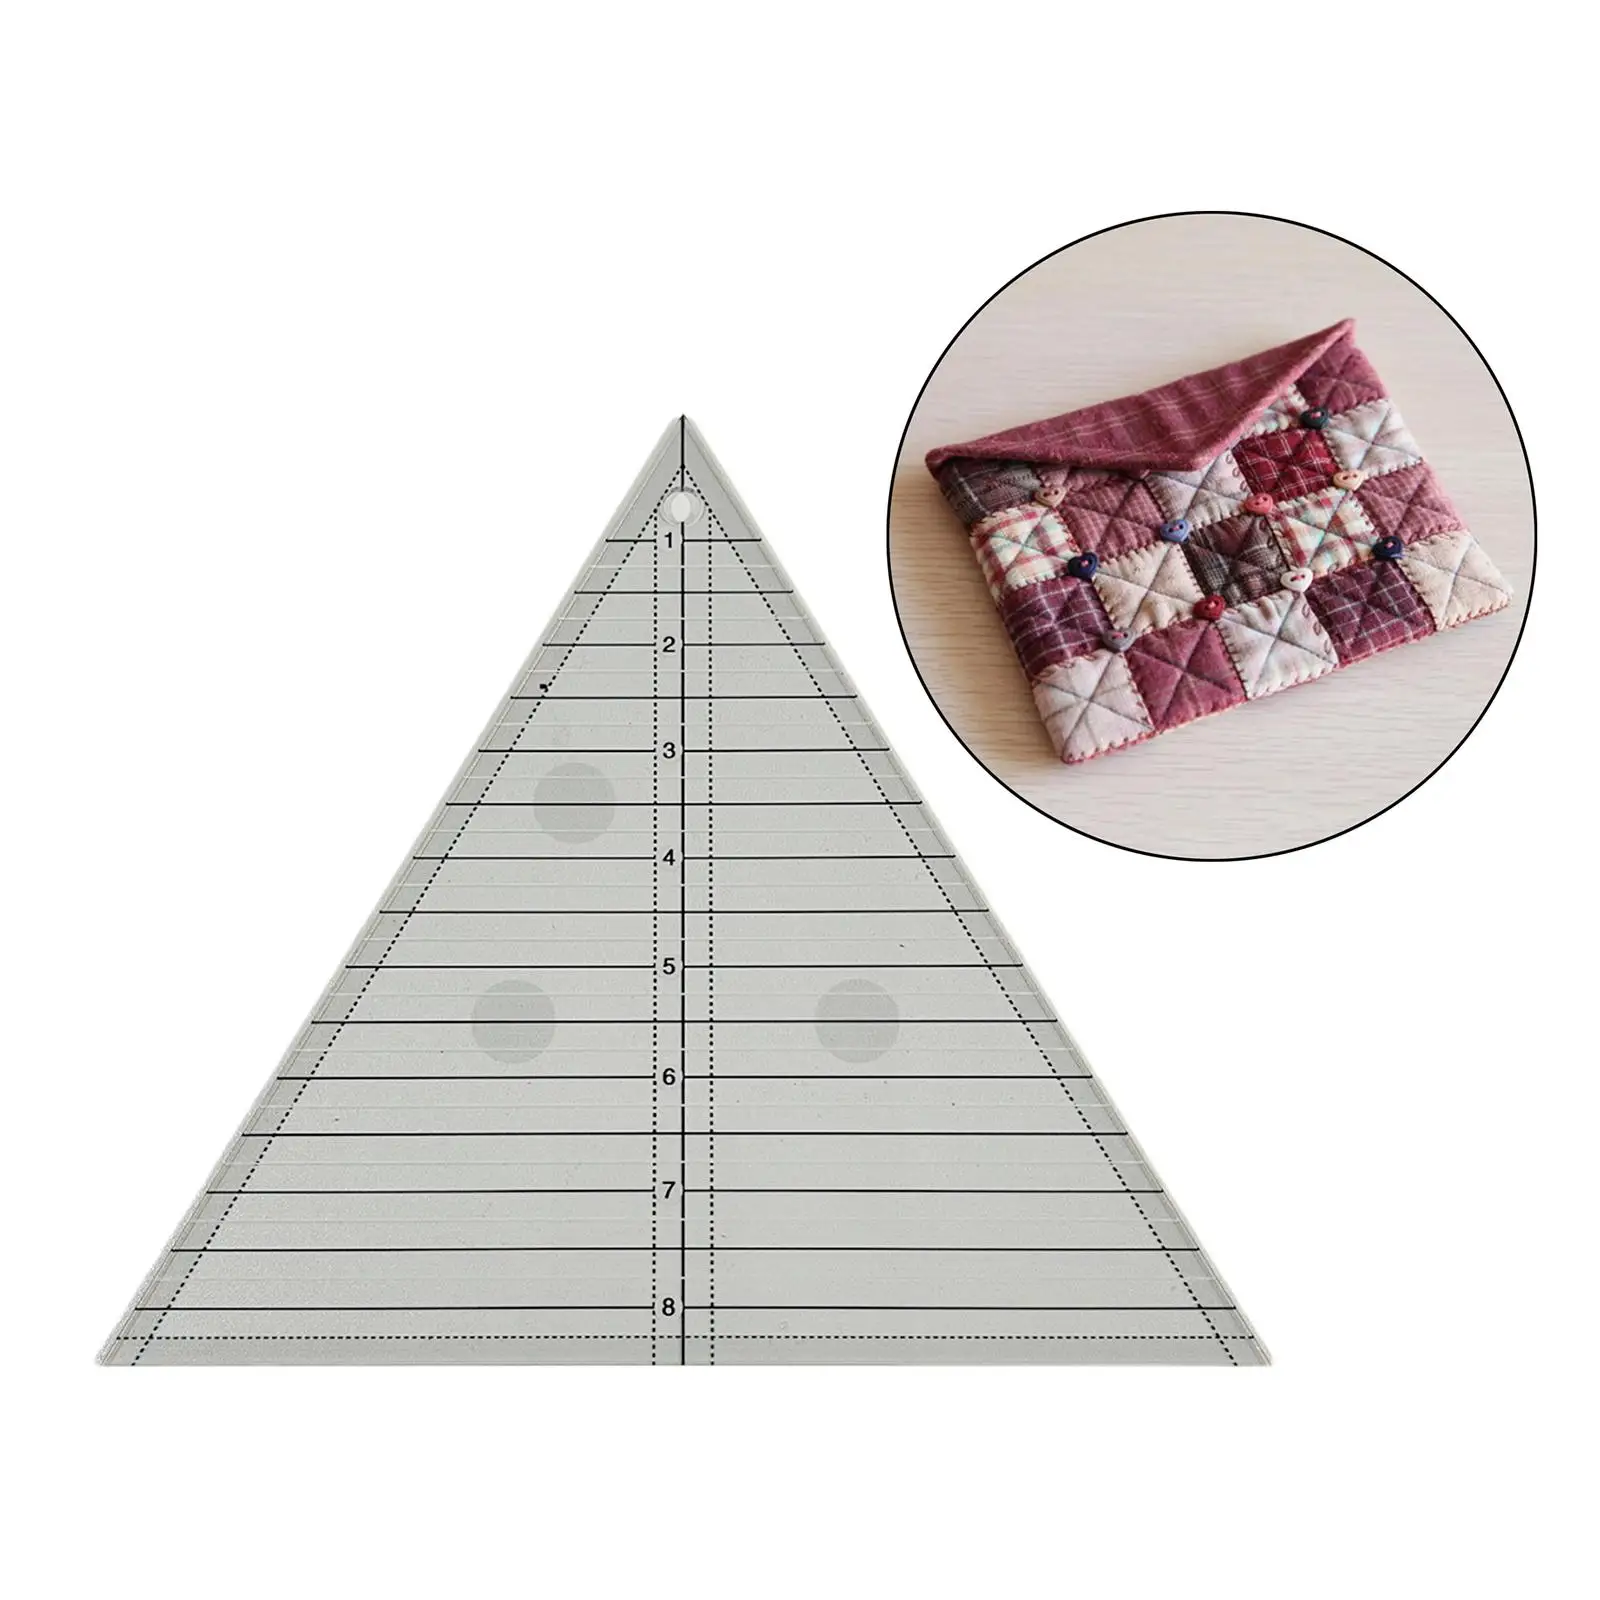  Cutter Ruler, Equilateral 60 Degree Triangle Quilting Template,